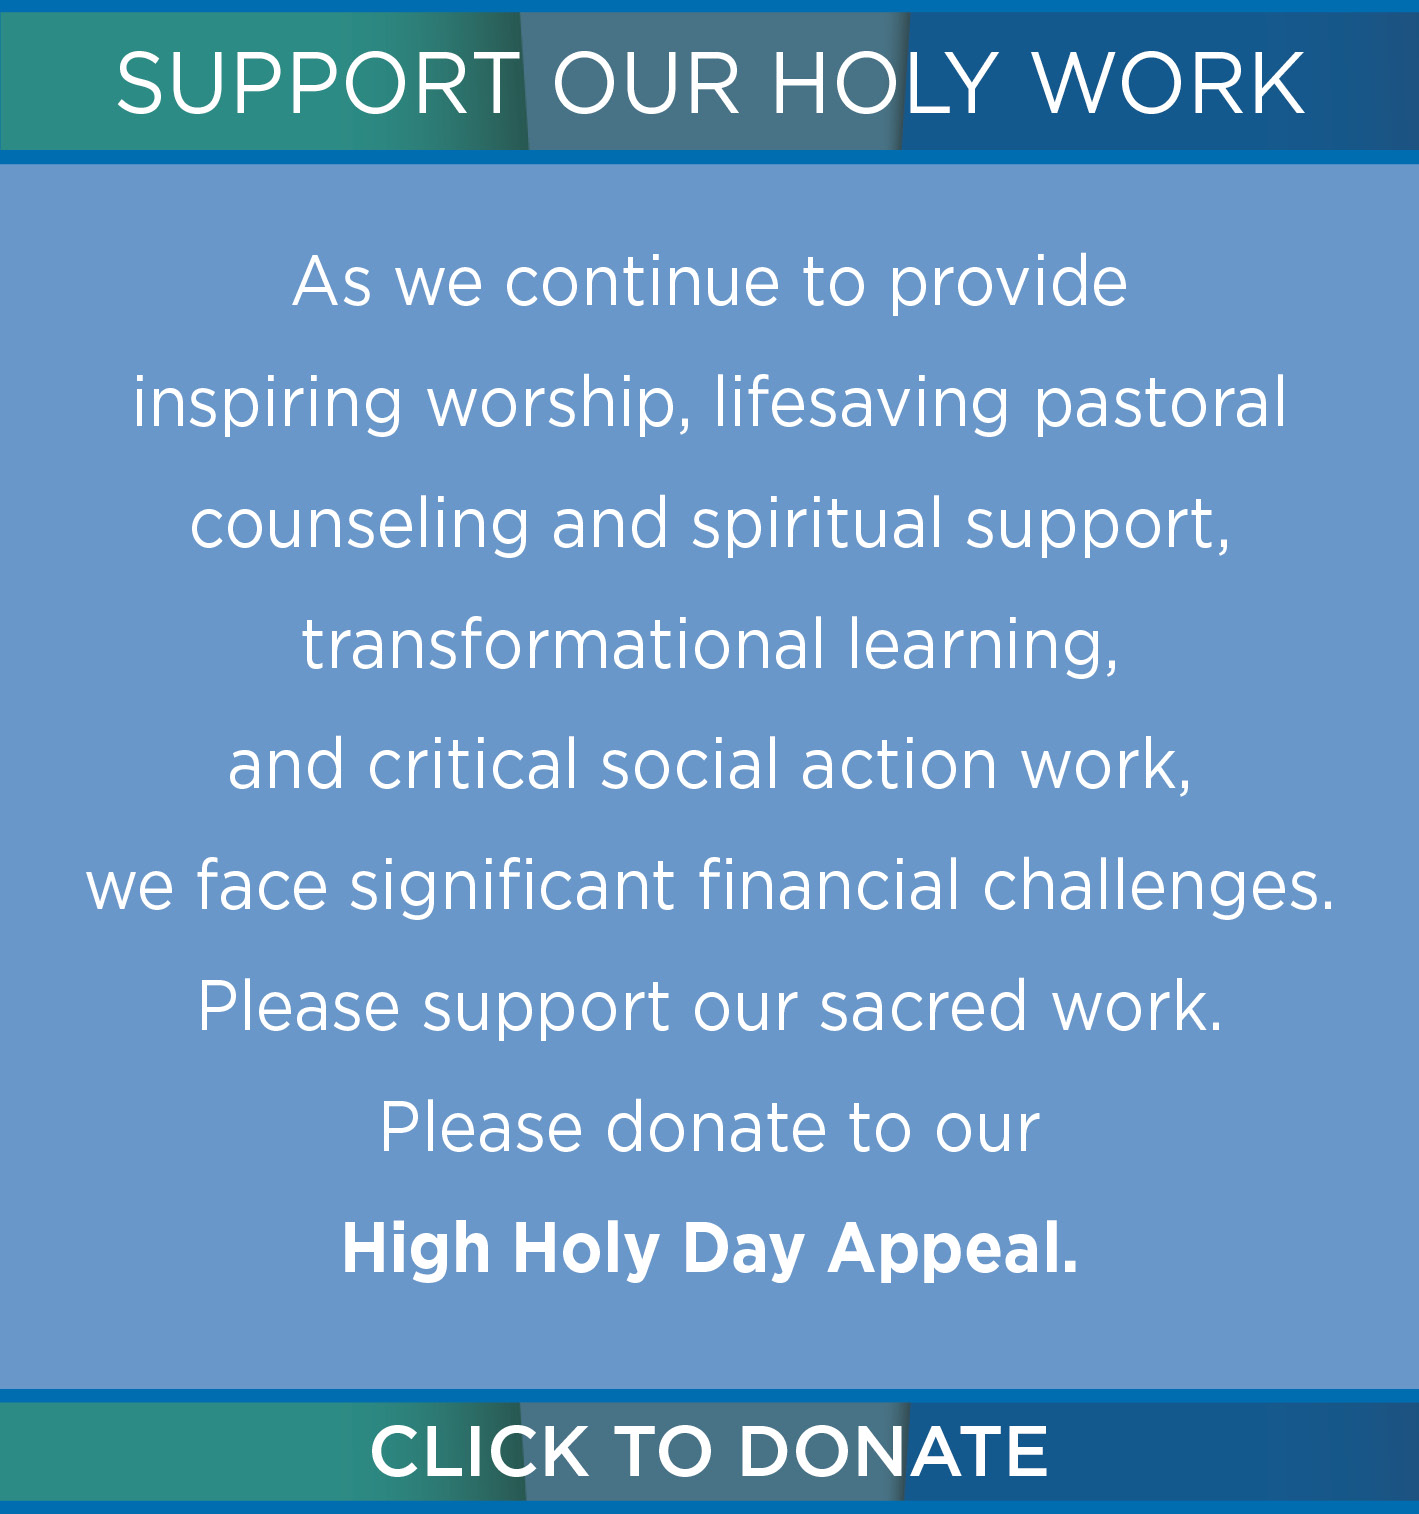 Support Our Holy Work